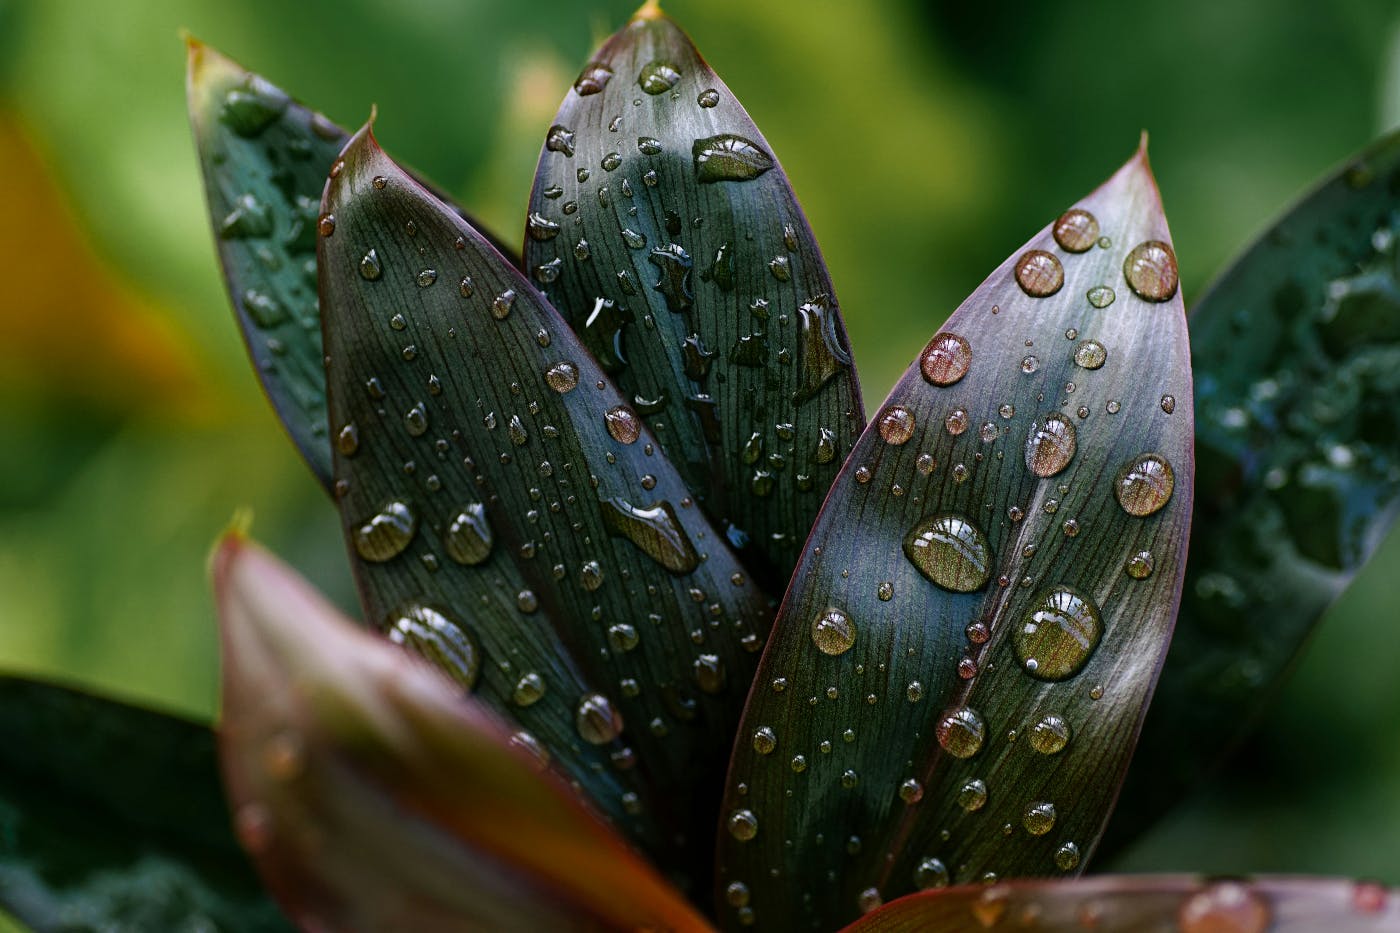 A plant with water droplets on it